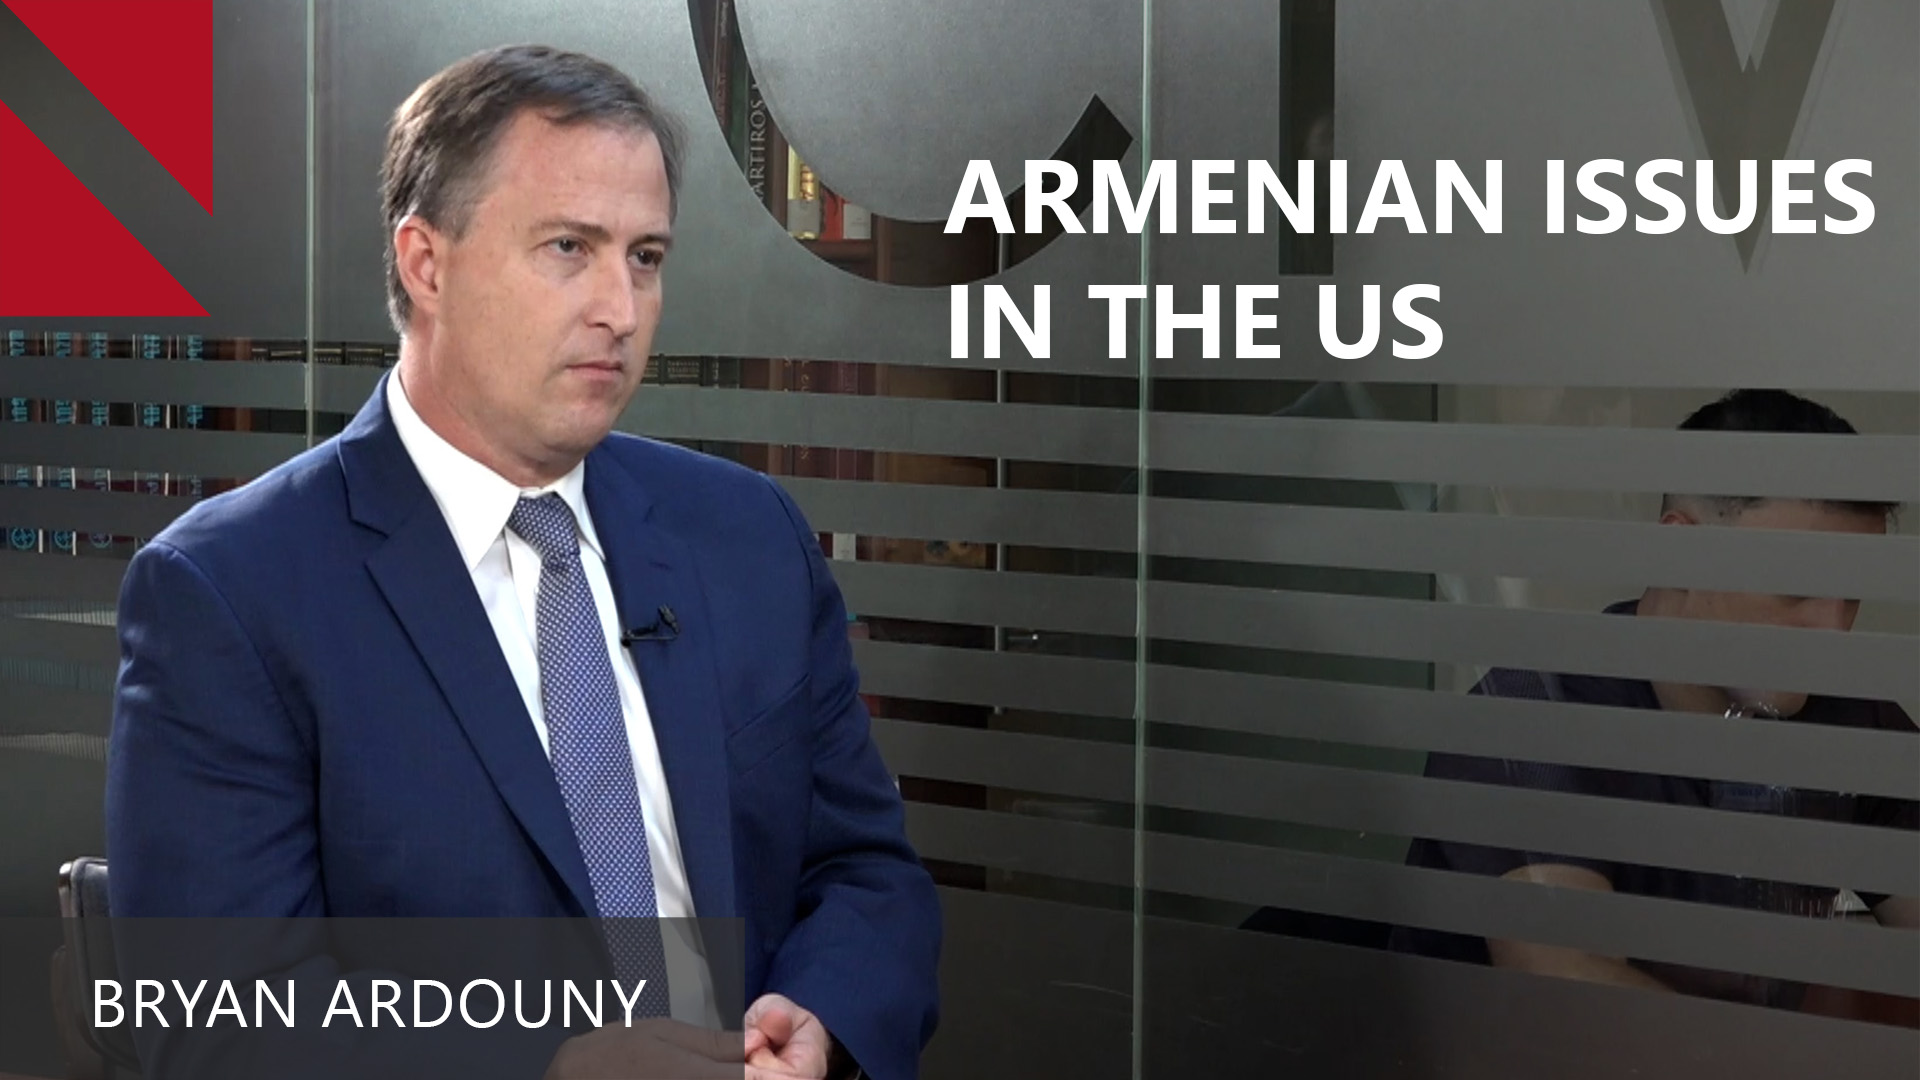 Strengthening ties between US and Armenia through the Armenian Assembly